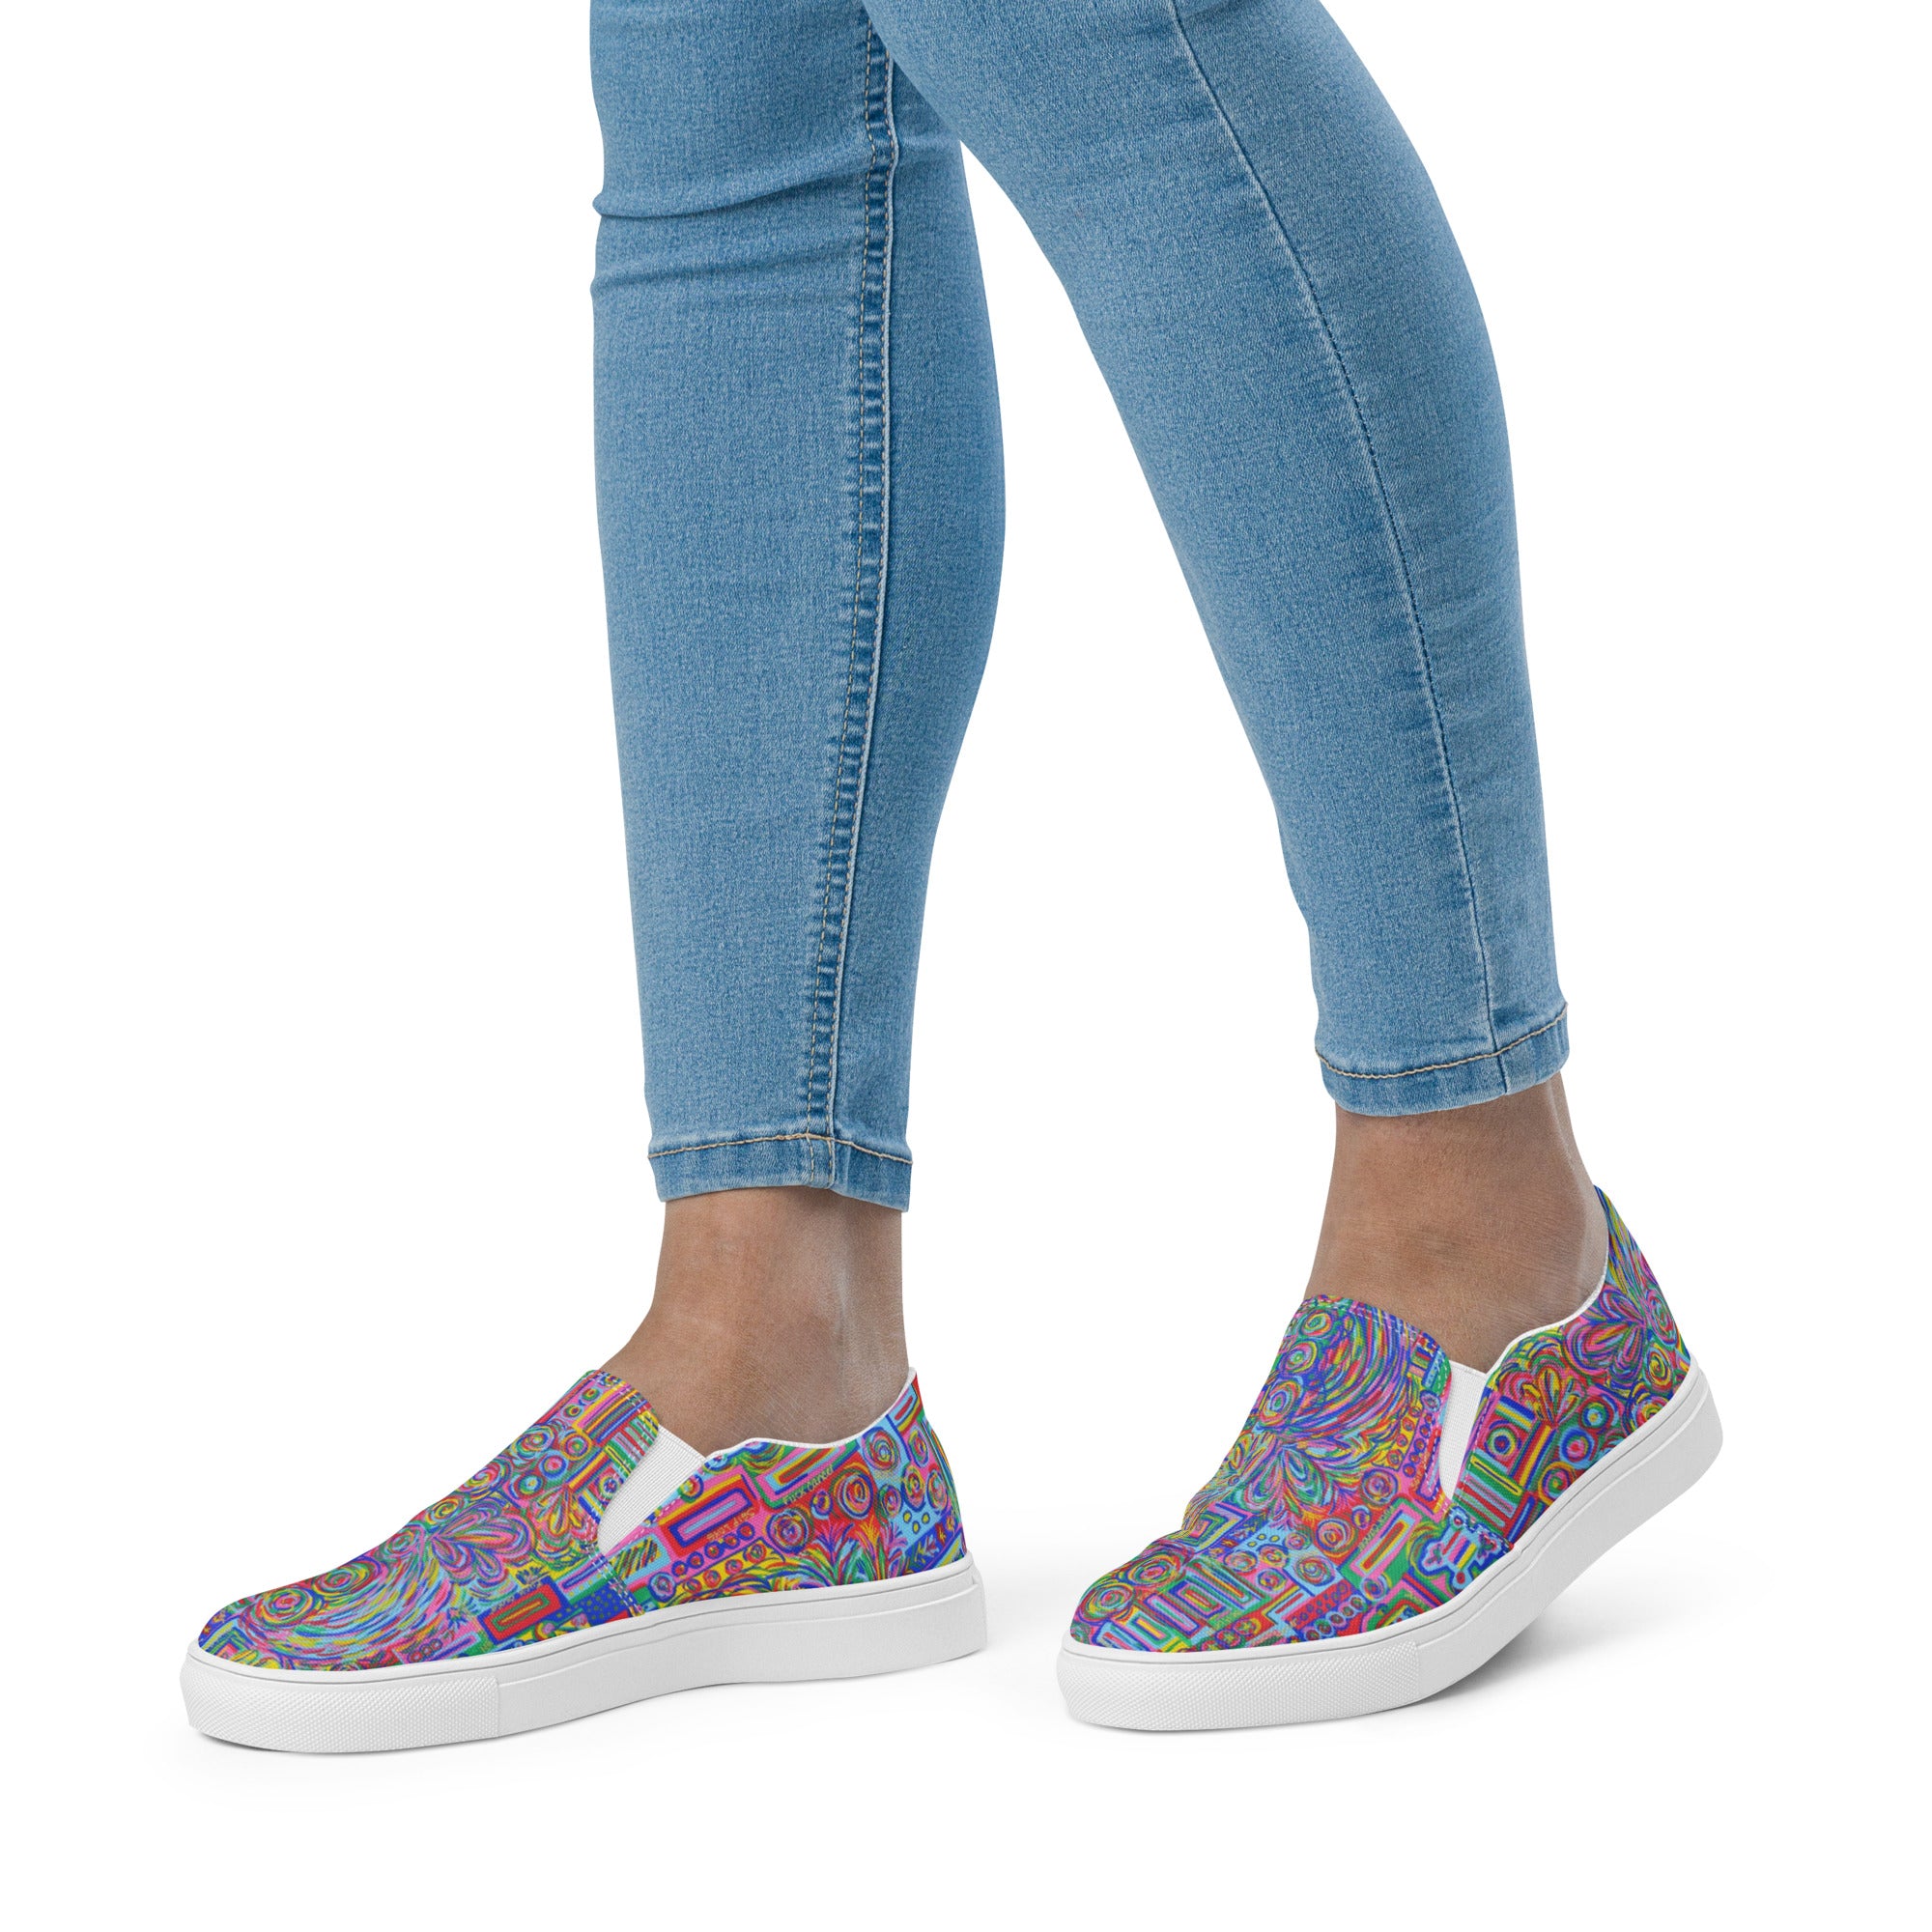 F-Cancer Women’s Slip-on Canvas Shoes